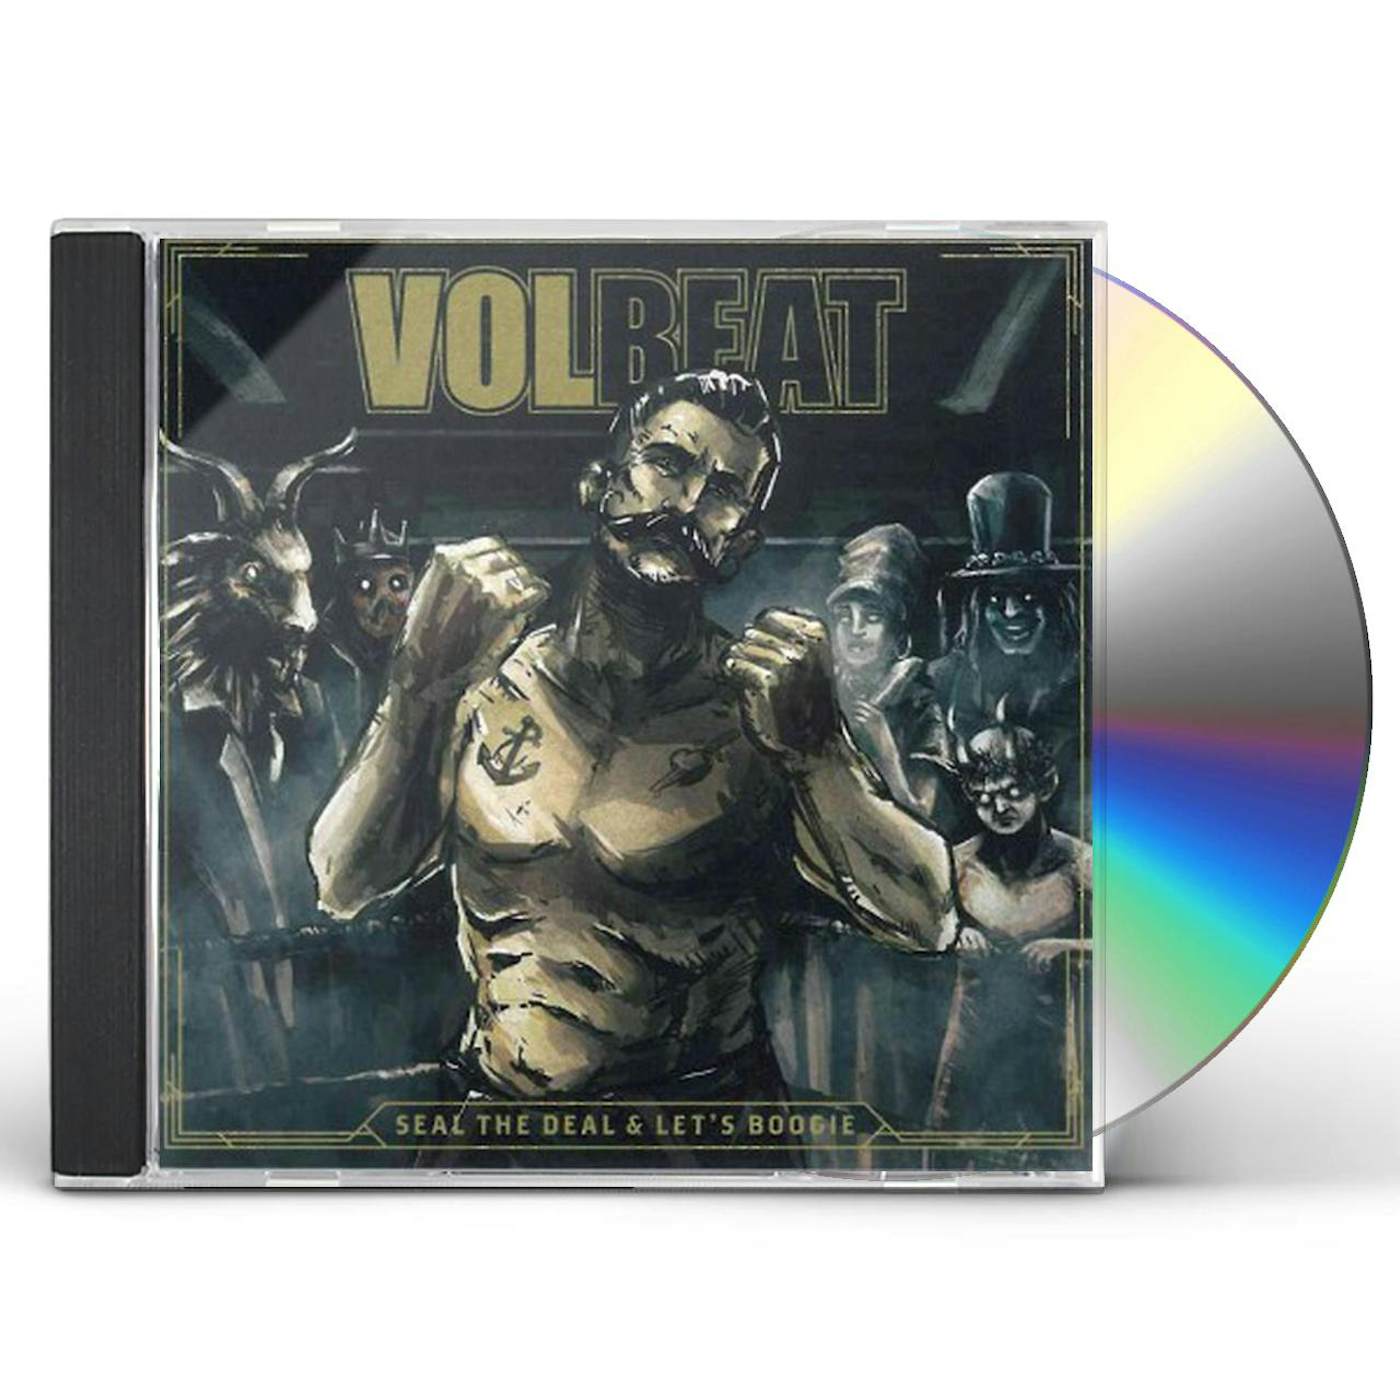 Volbeat SEAL THE DEAL & LET'S BOOGIE CD